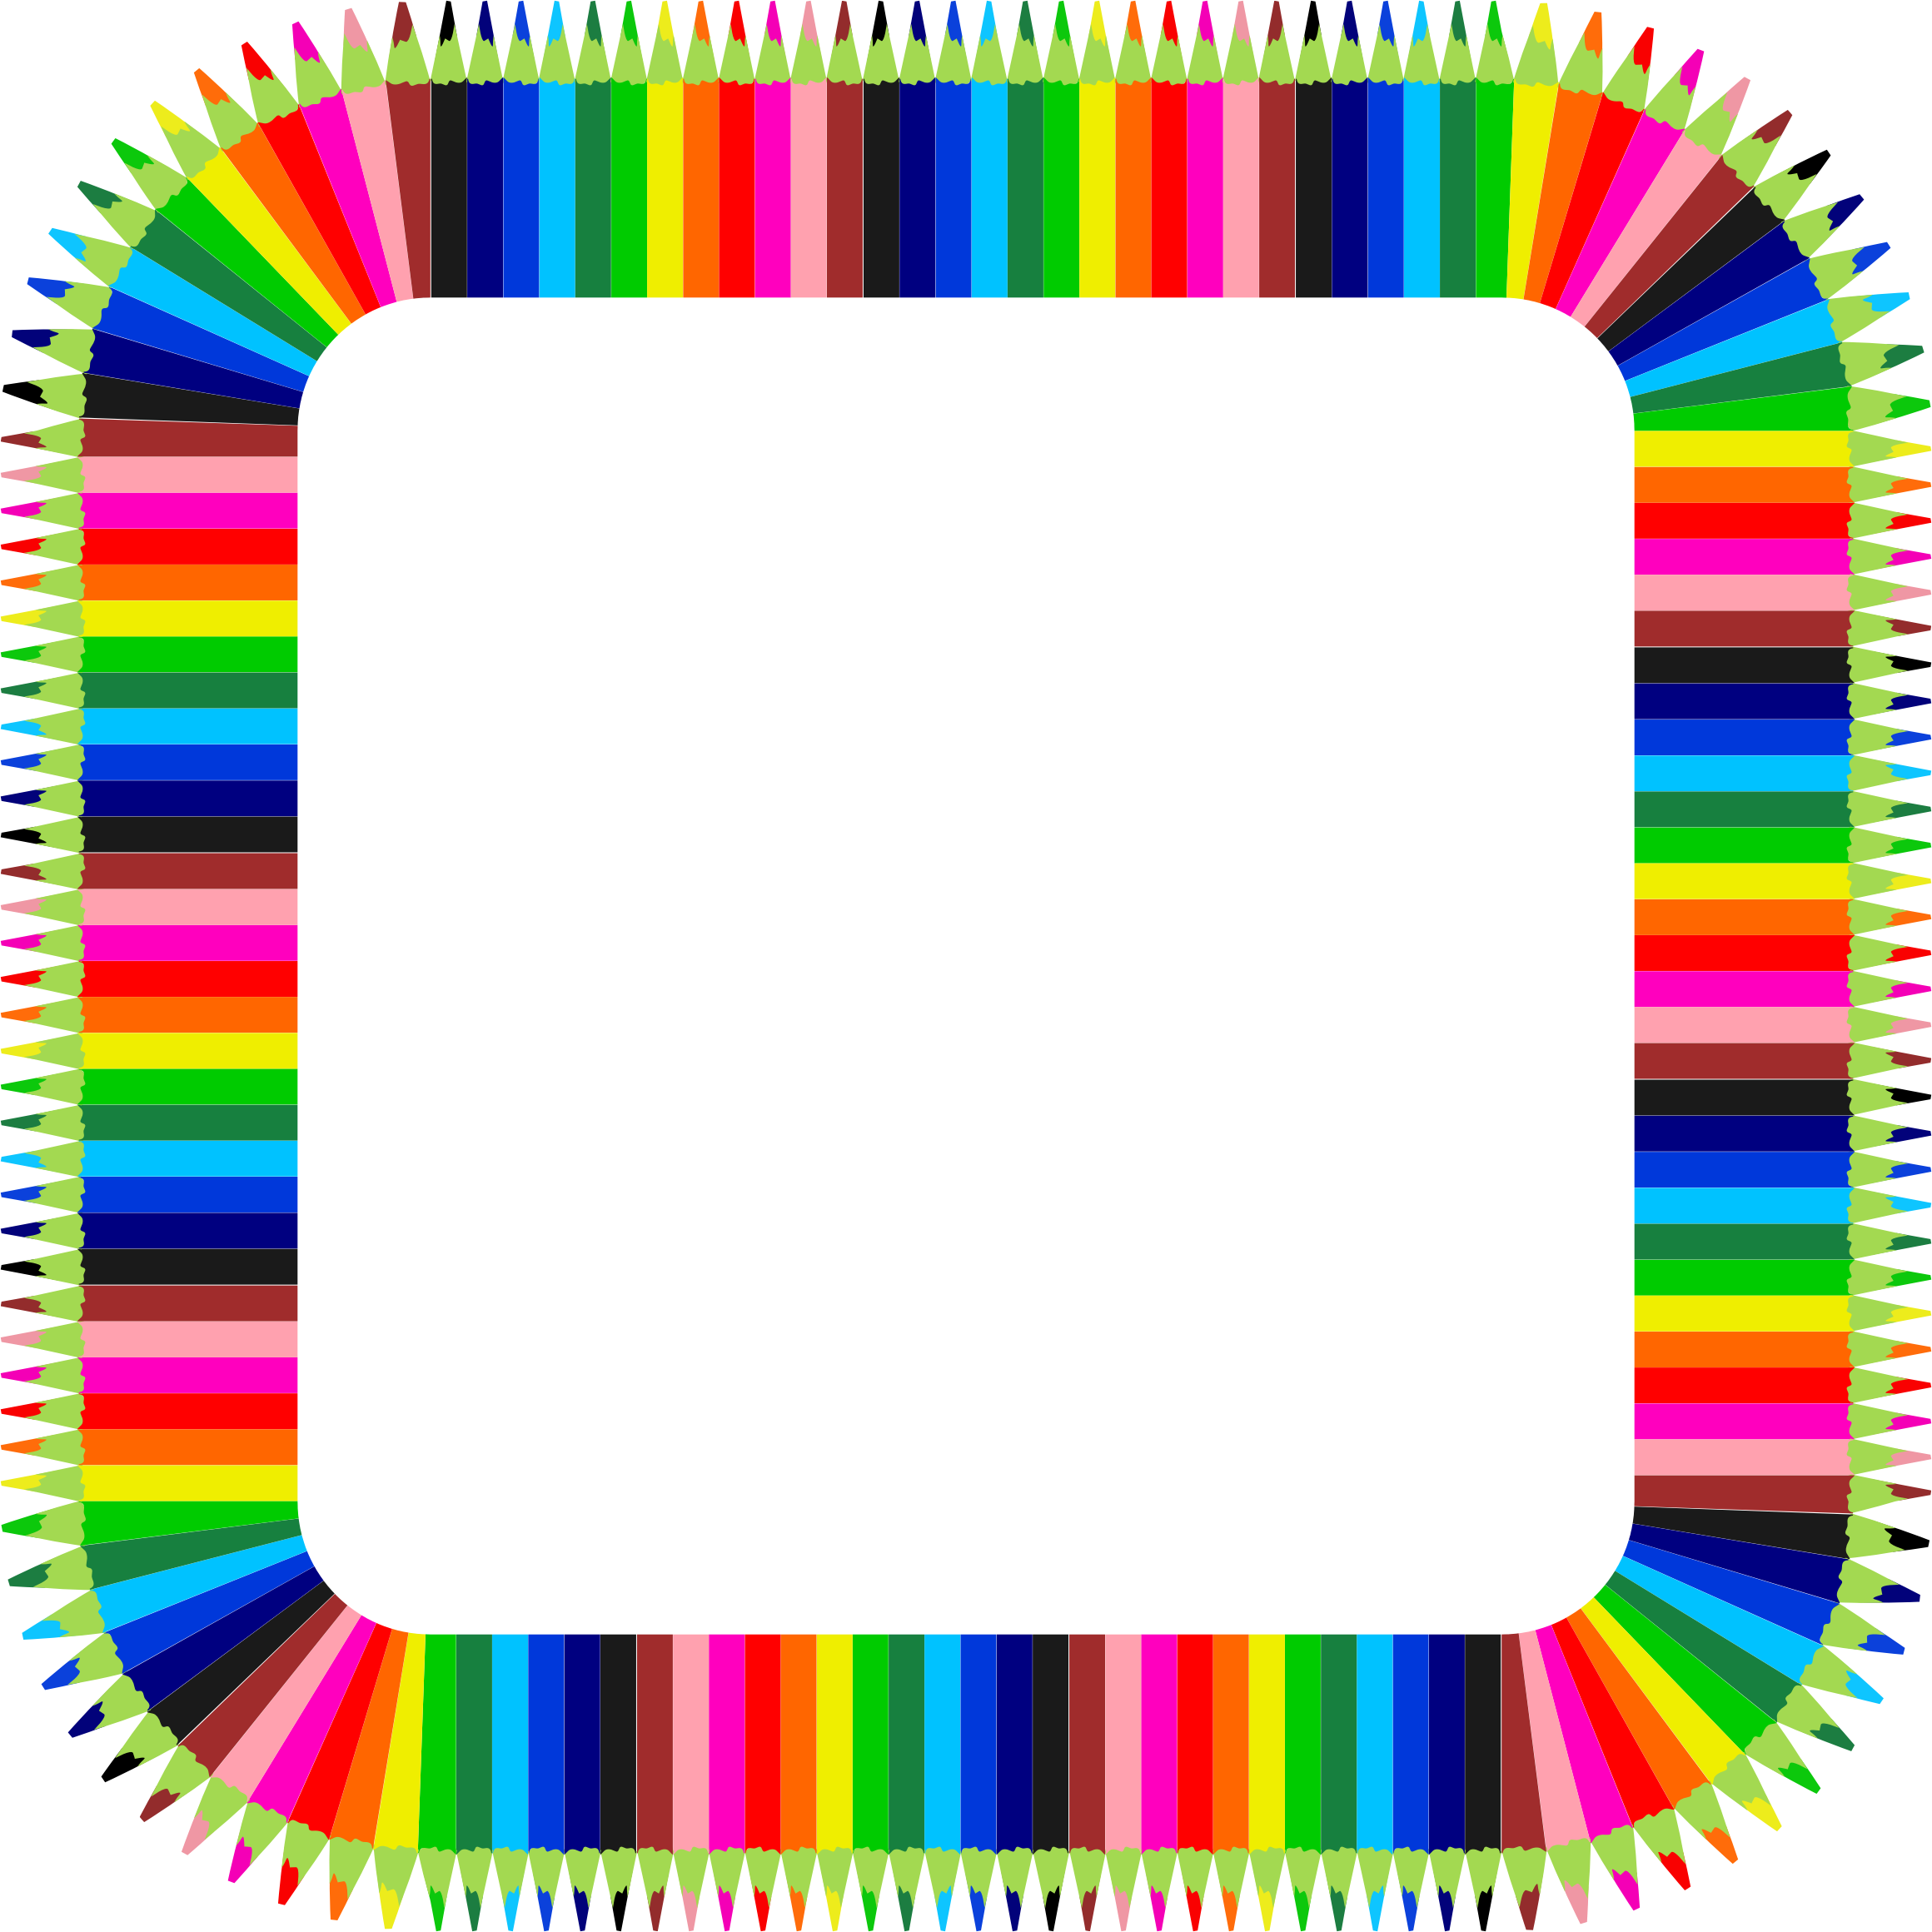 Frame clipart colorful.